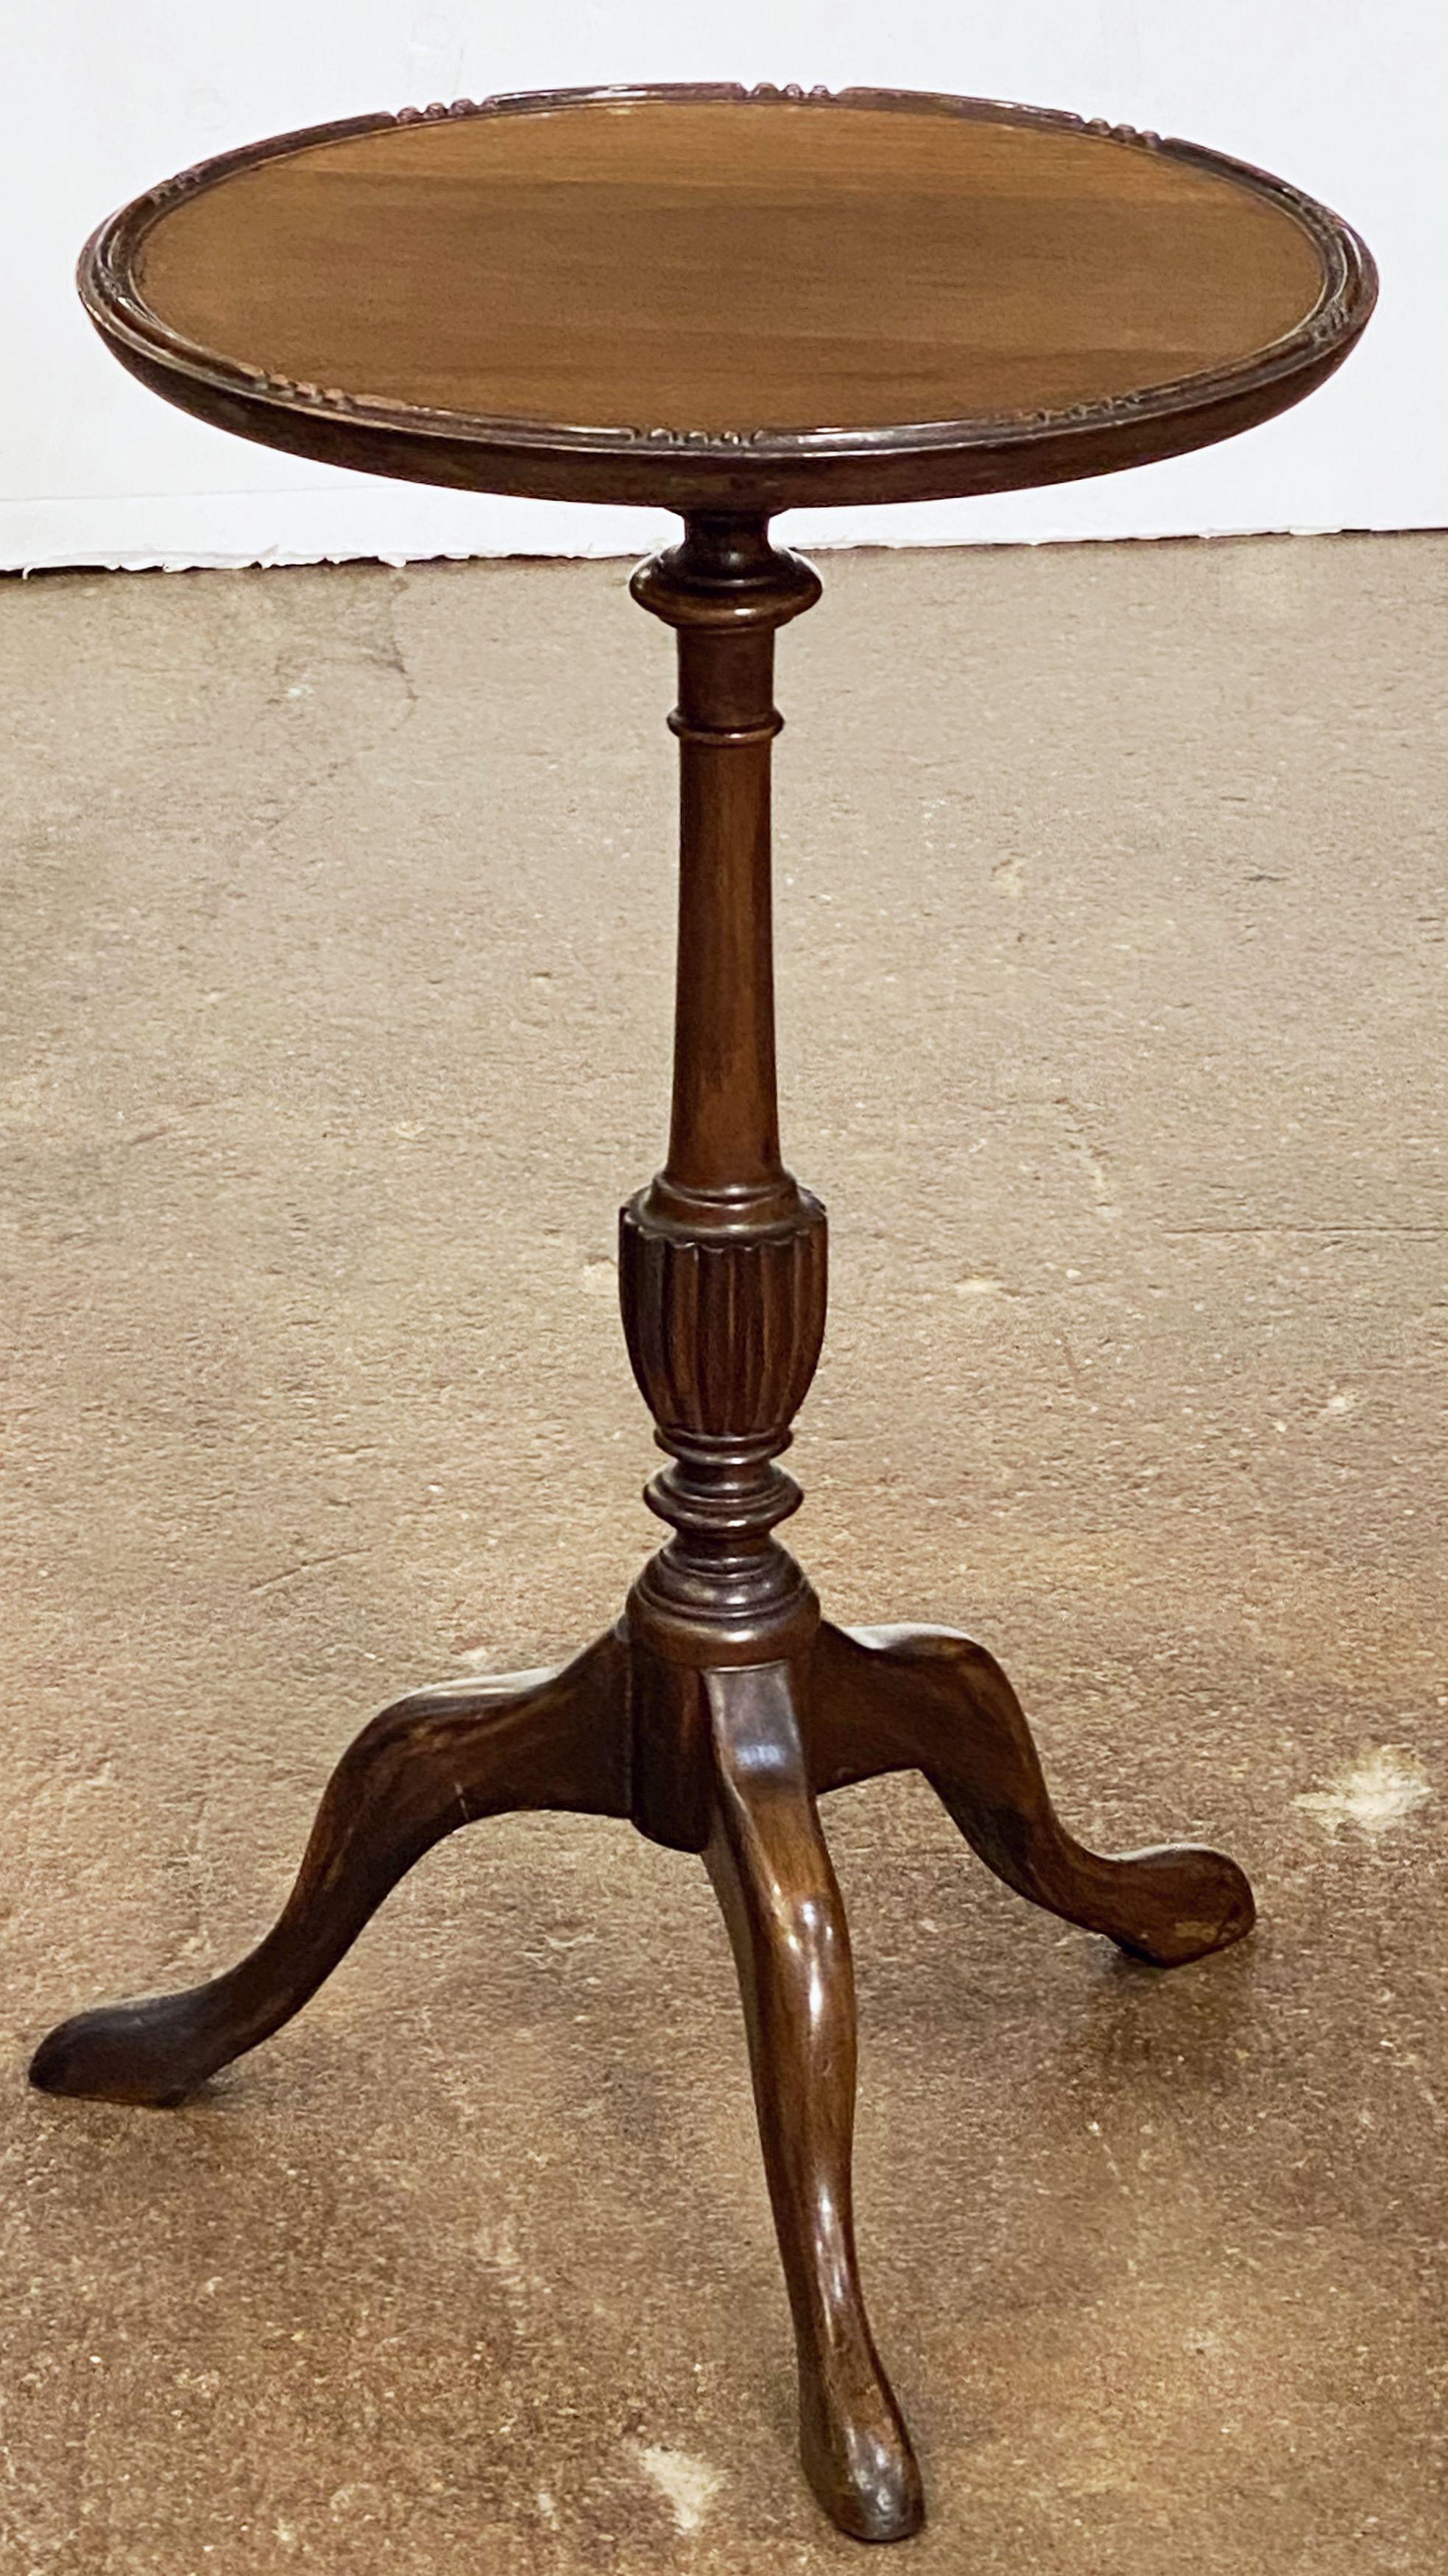 An English wine table of mahogany featuring a raised edge around the circumference of the round, moulded top, mounted upon a turned column pedestal with tripod base.

An excellent choice as a side table or for serving.

 